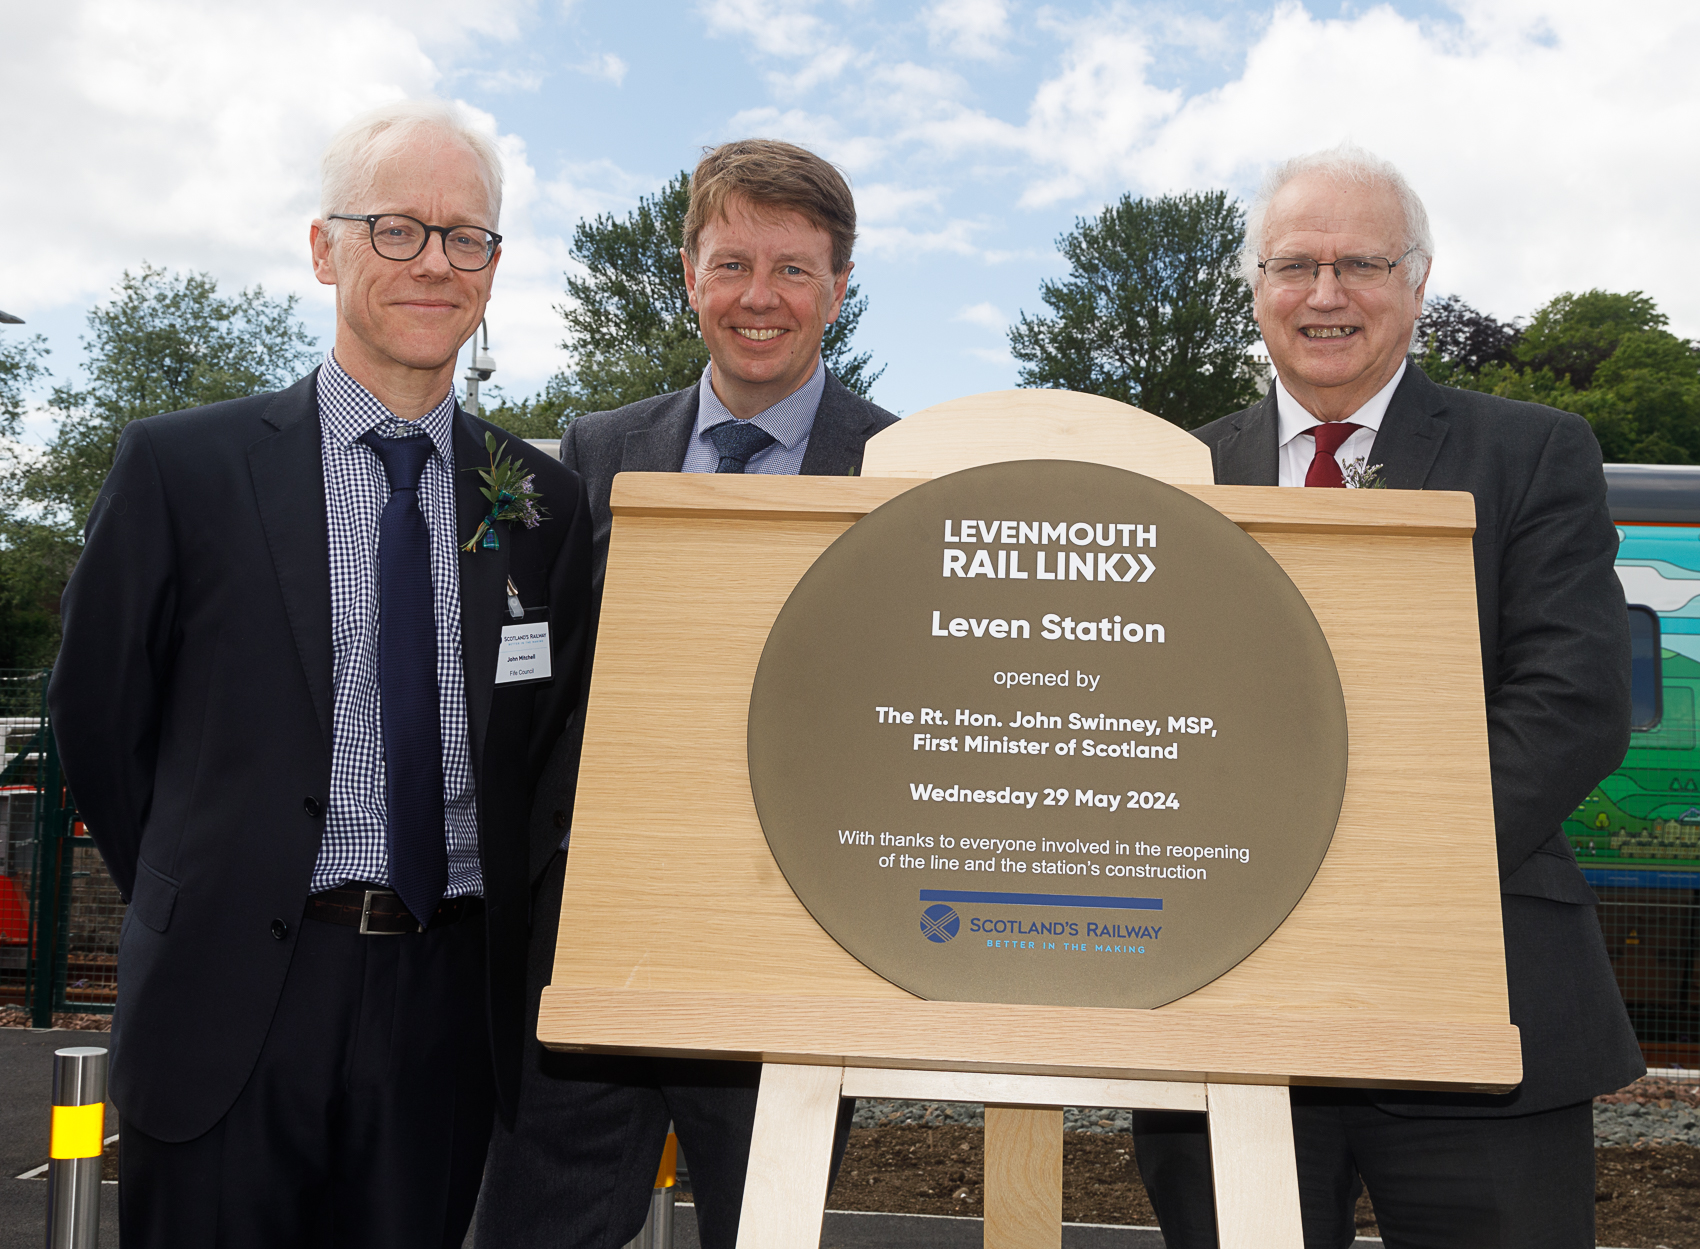 Cllr Ross is pictured below (right) alongside John Mitchell, head of roads and transportation, and Ken Gourlay, Fife Council chief executive